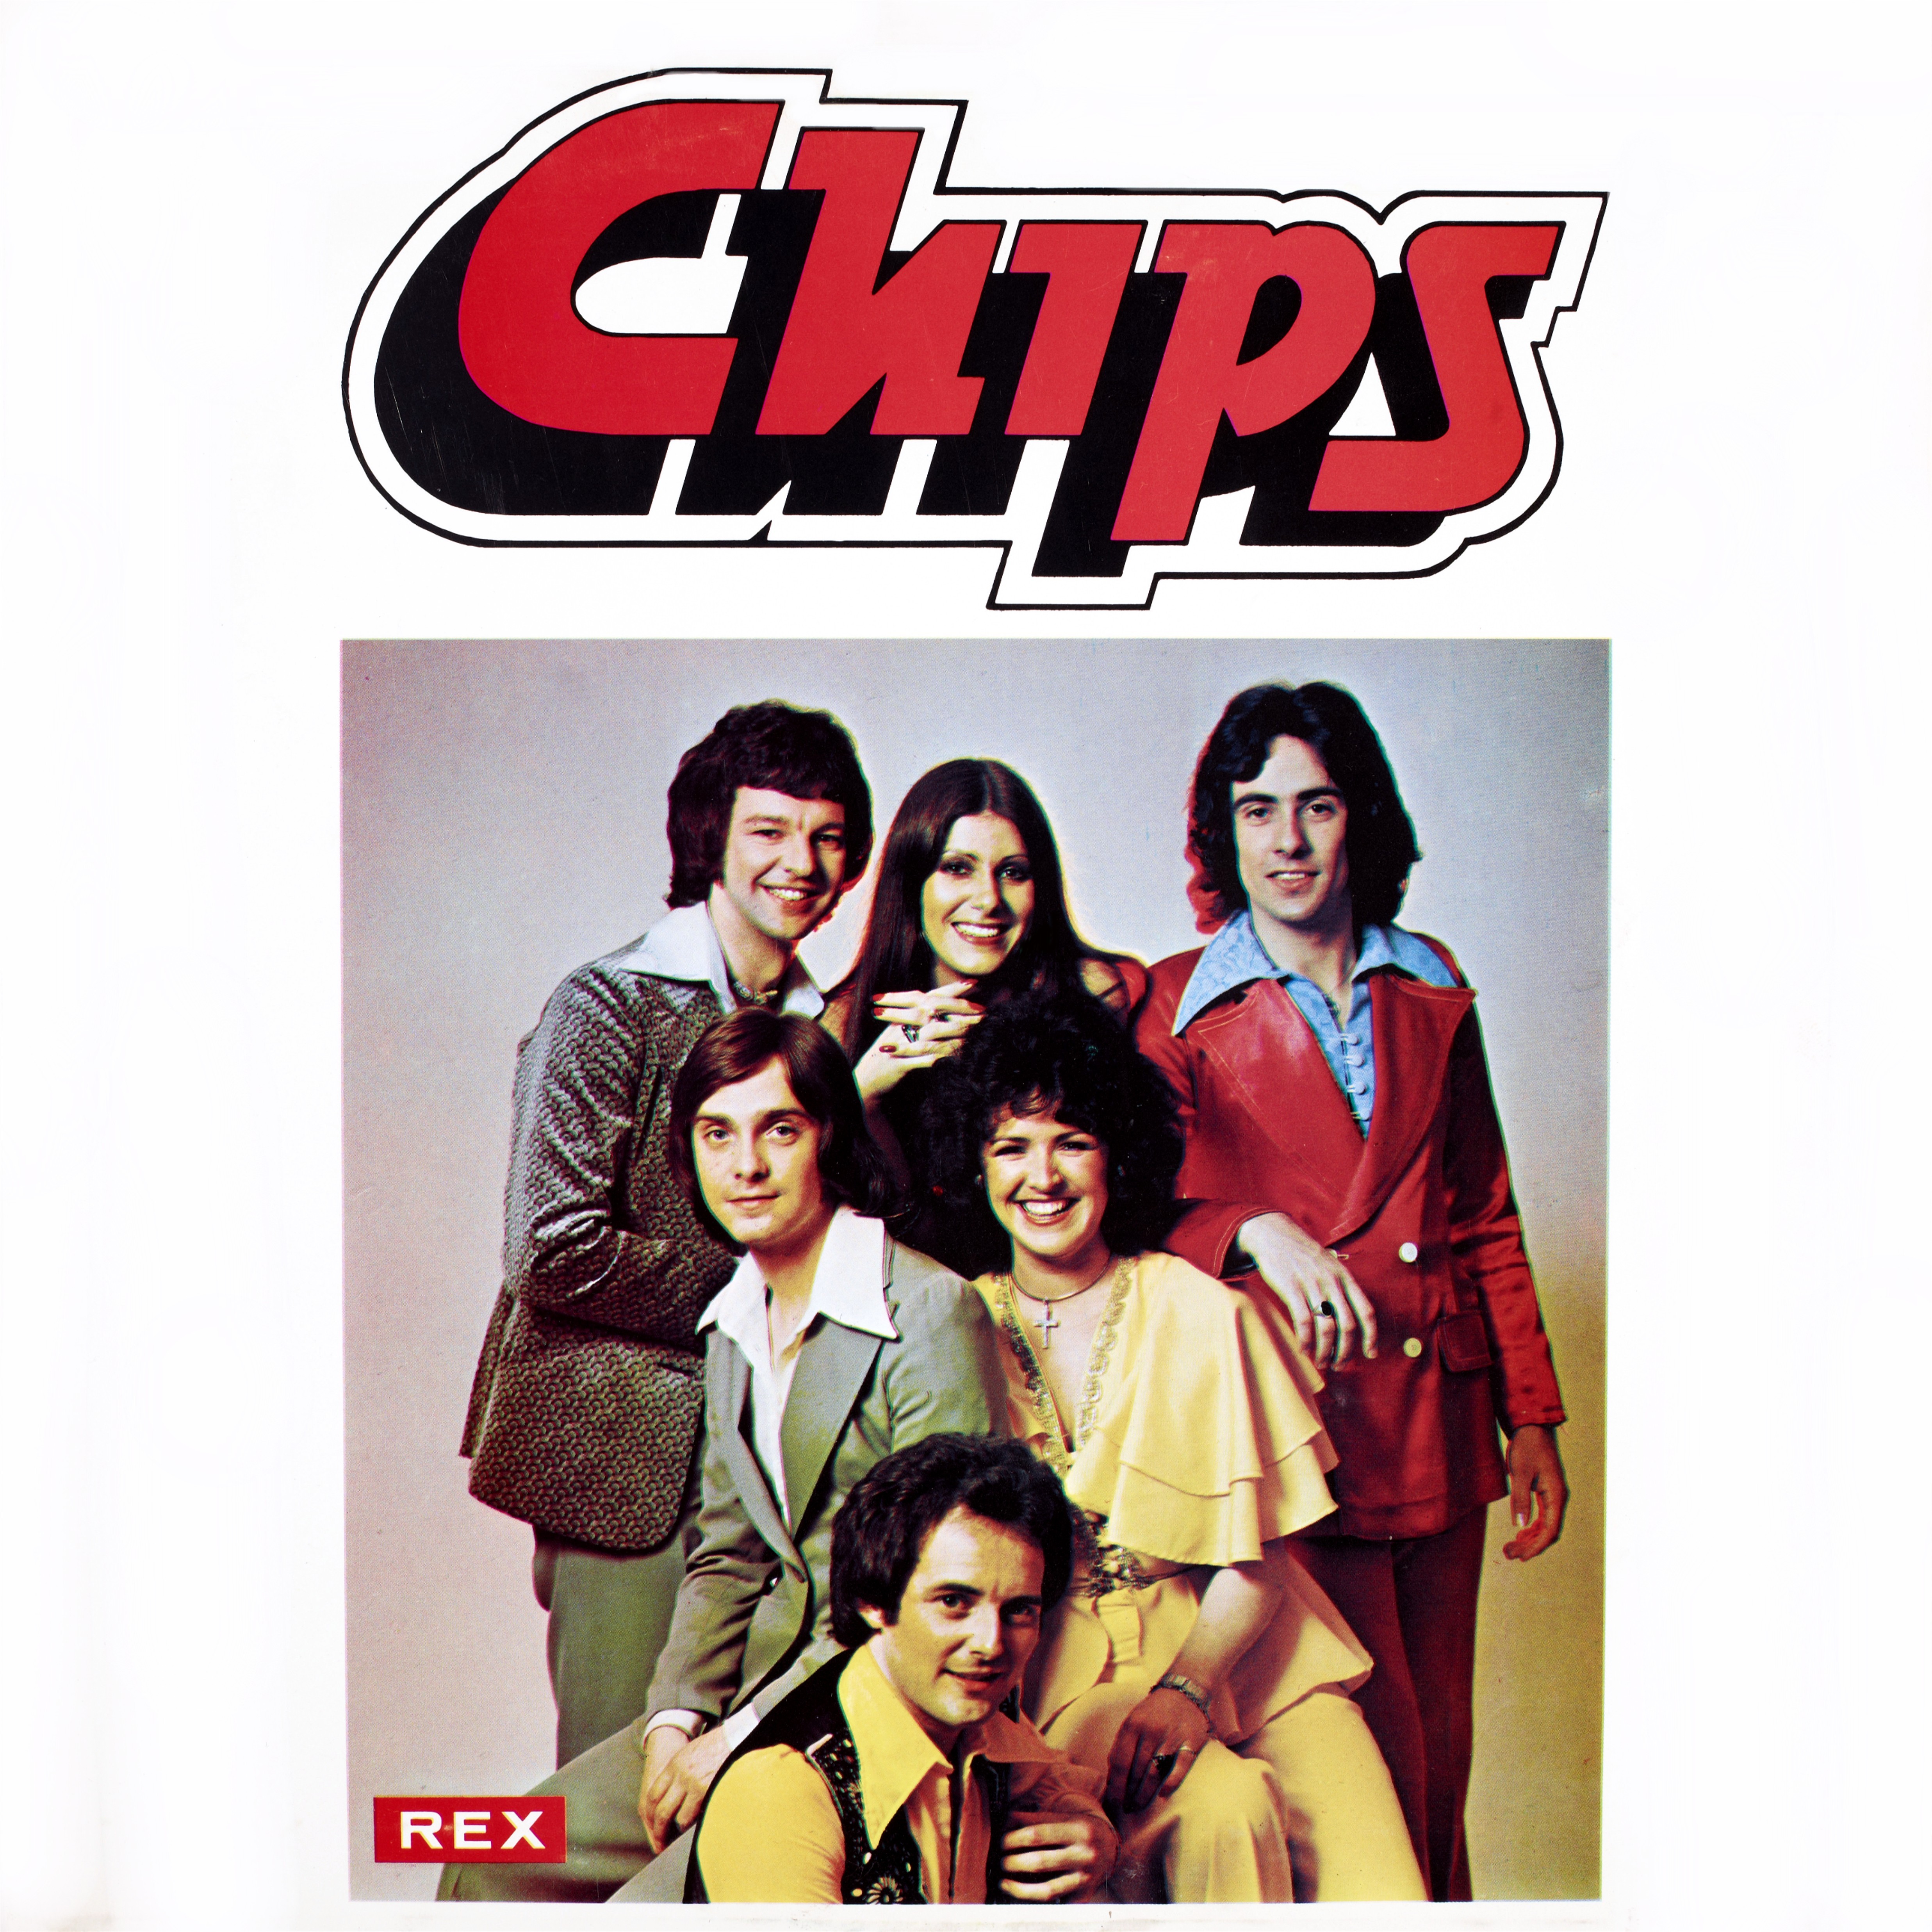 Chips (Band) #